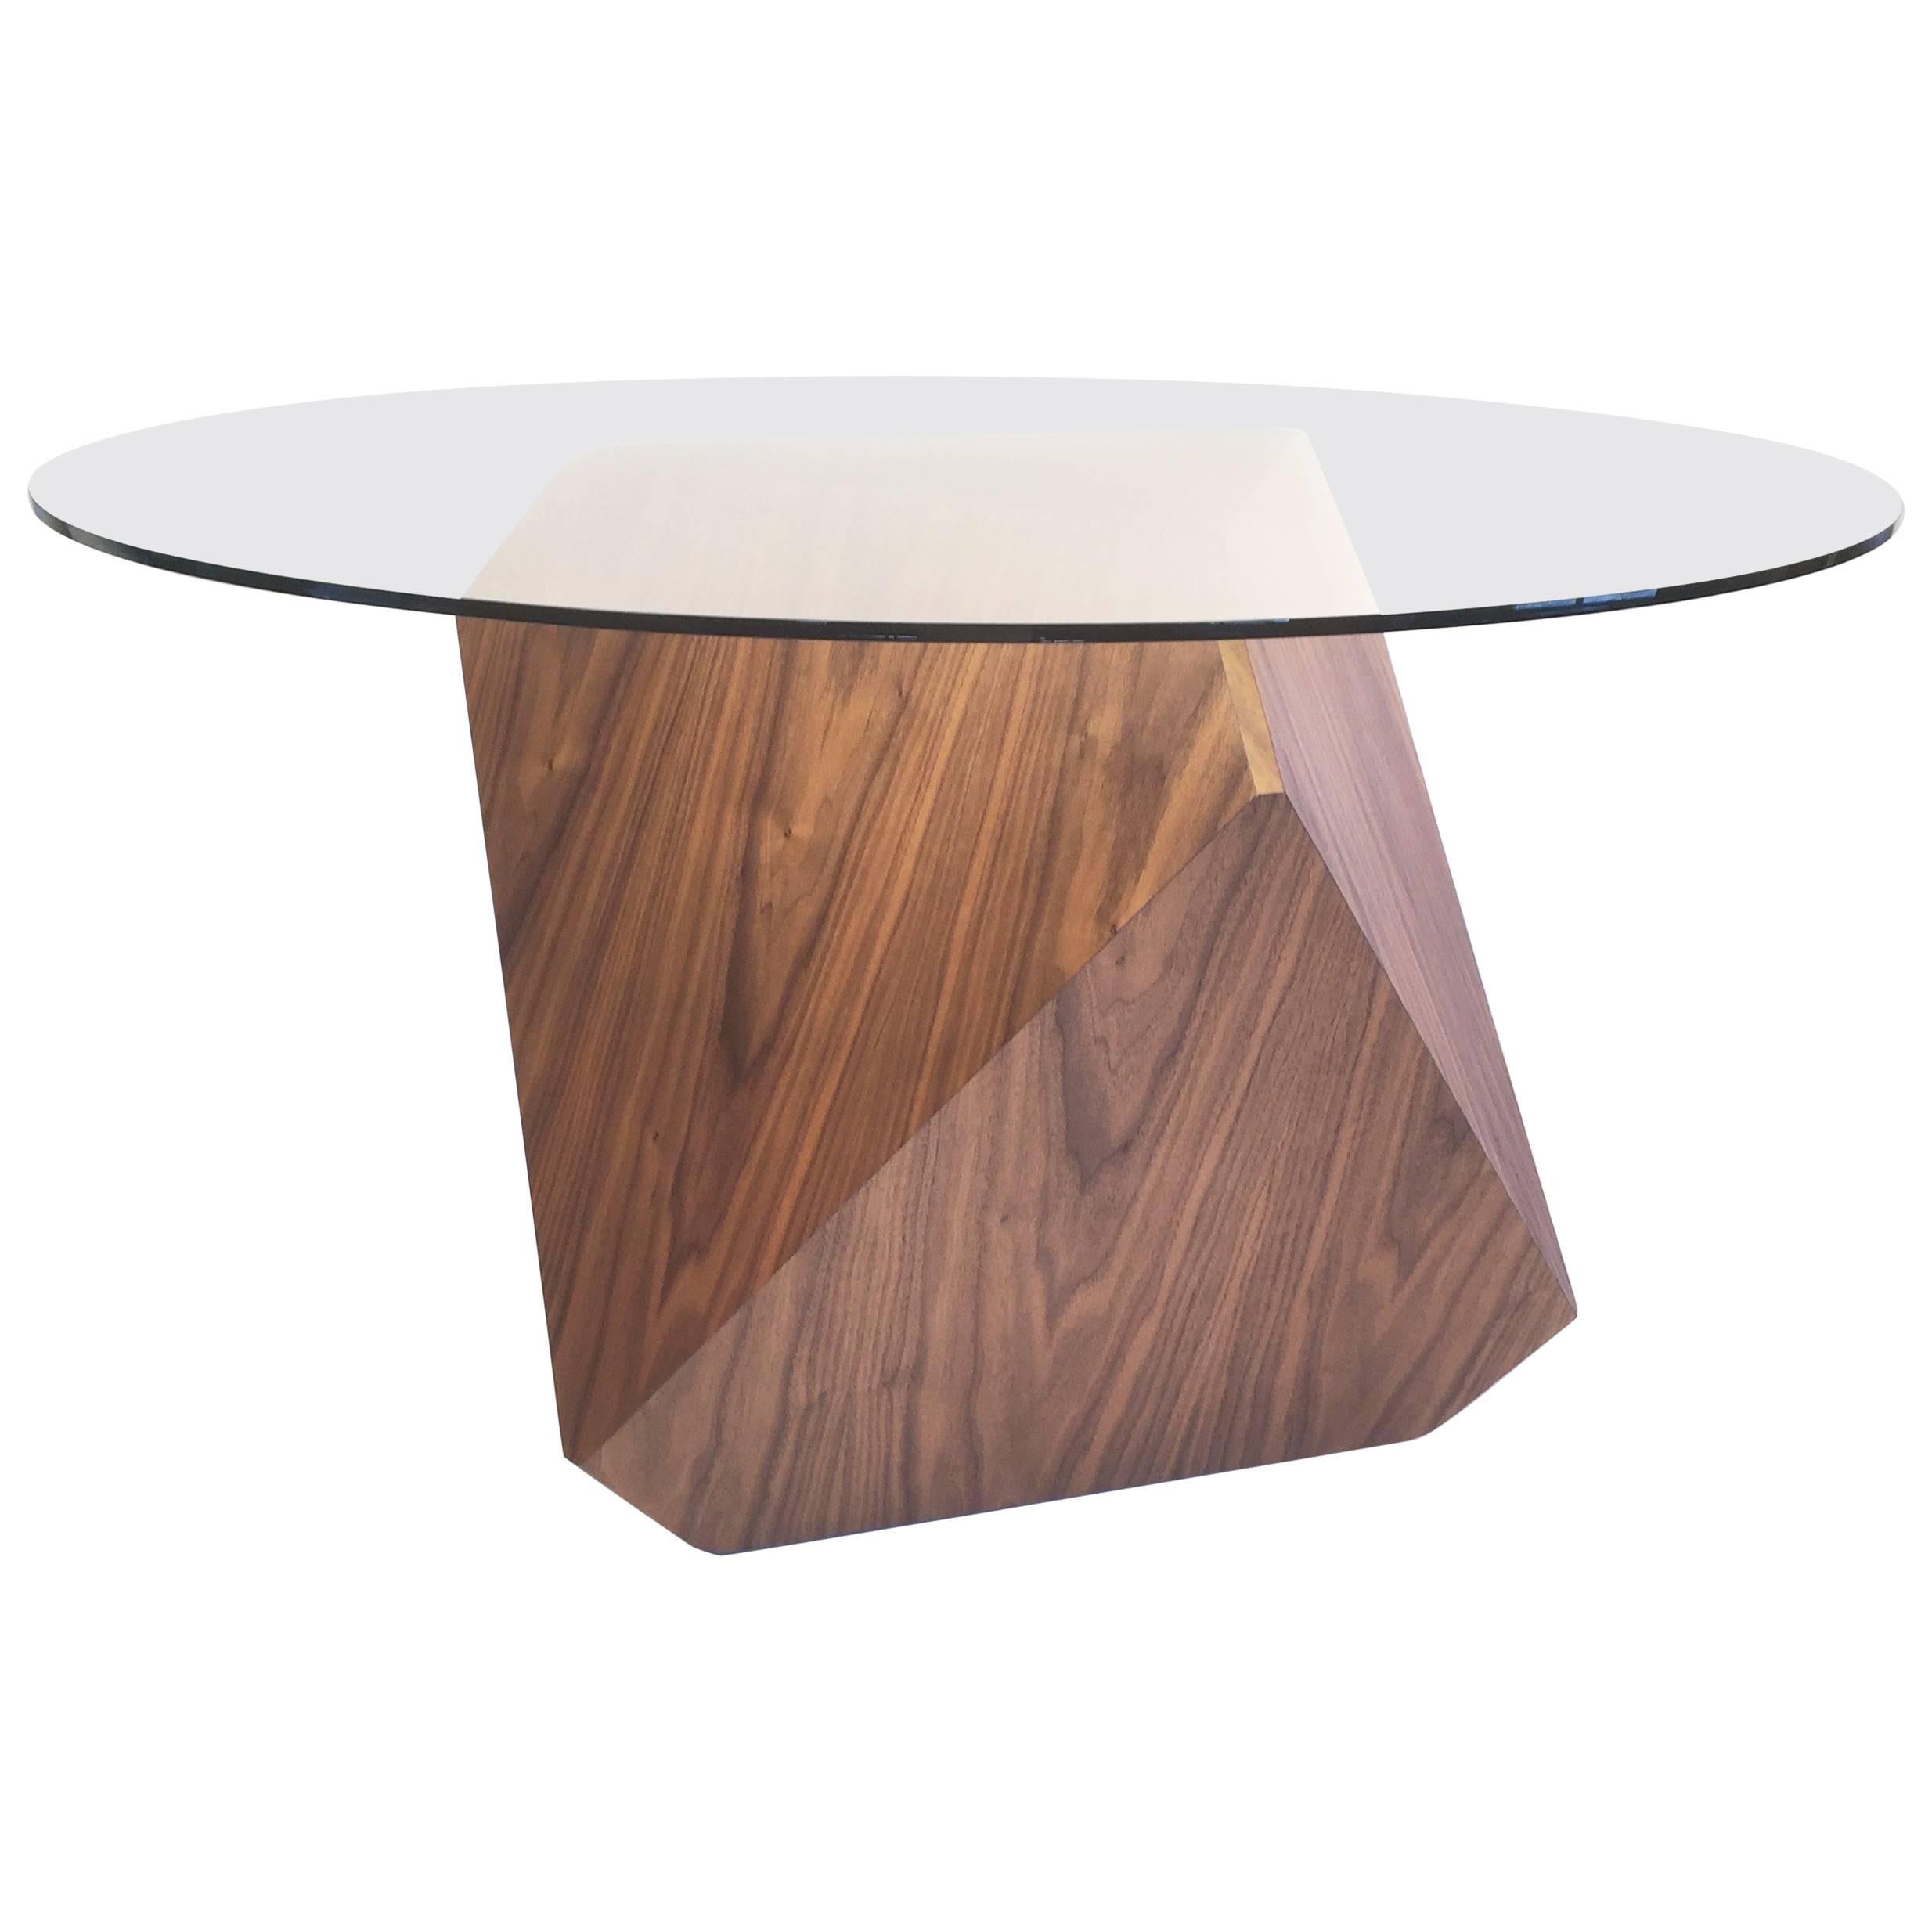 i - con - ic : worthy of veneration, timeless ; see " hal ". dining pedestal 54"